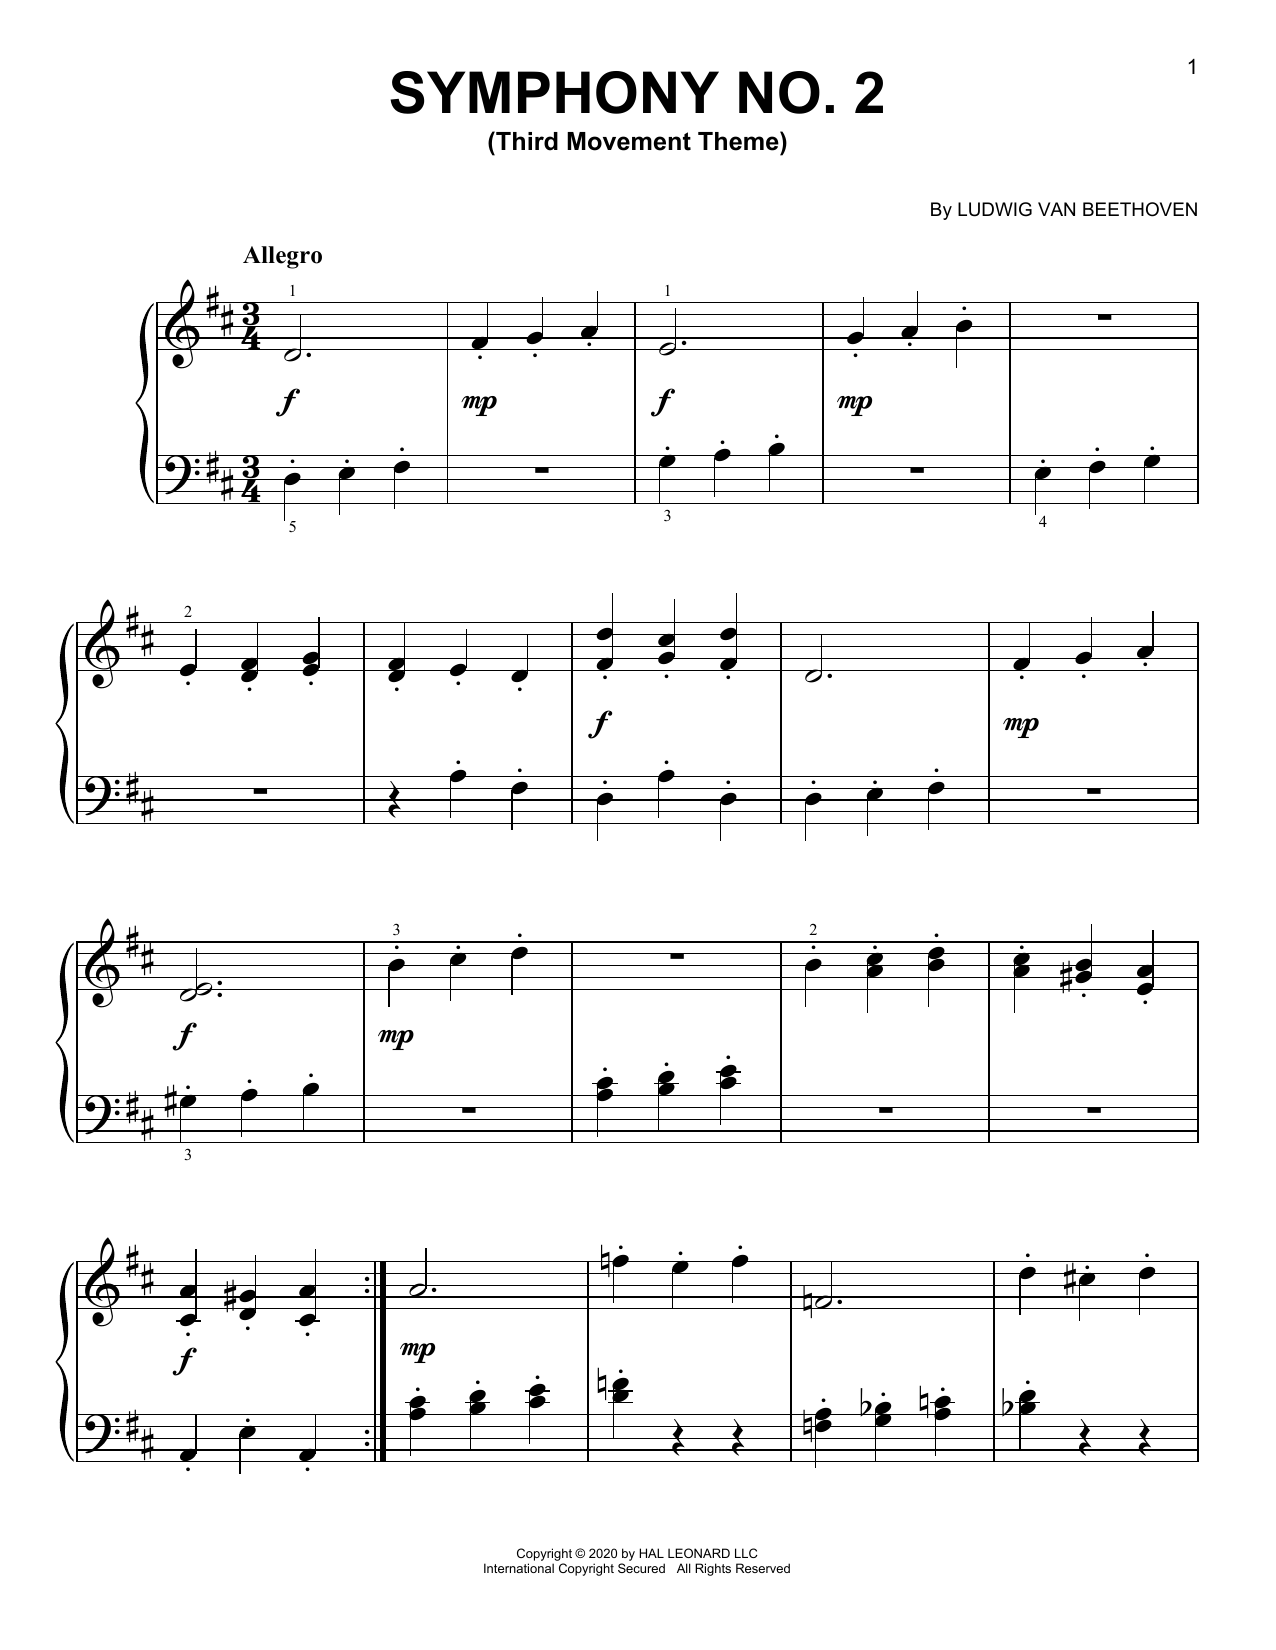 Ludwig van Beethoven Symphony No. 2, Third Movement Excerpt sheet music preview music notes and score for Easy Piano including 3 page(s)